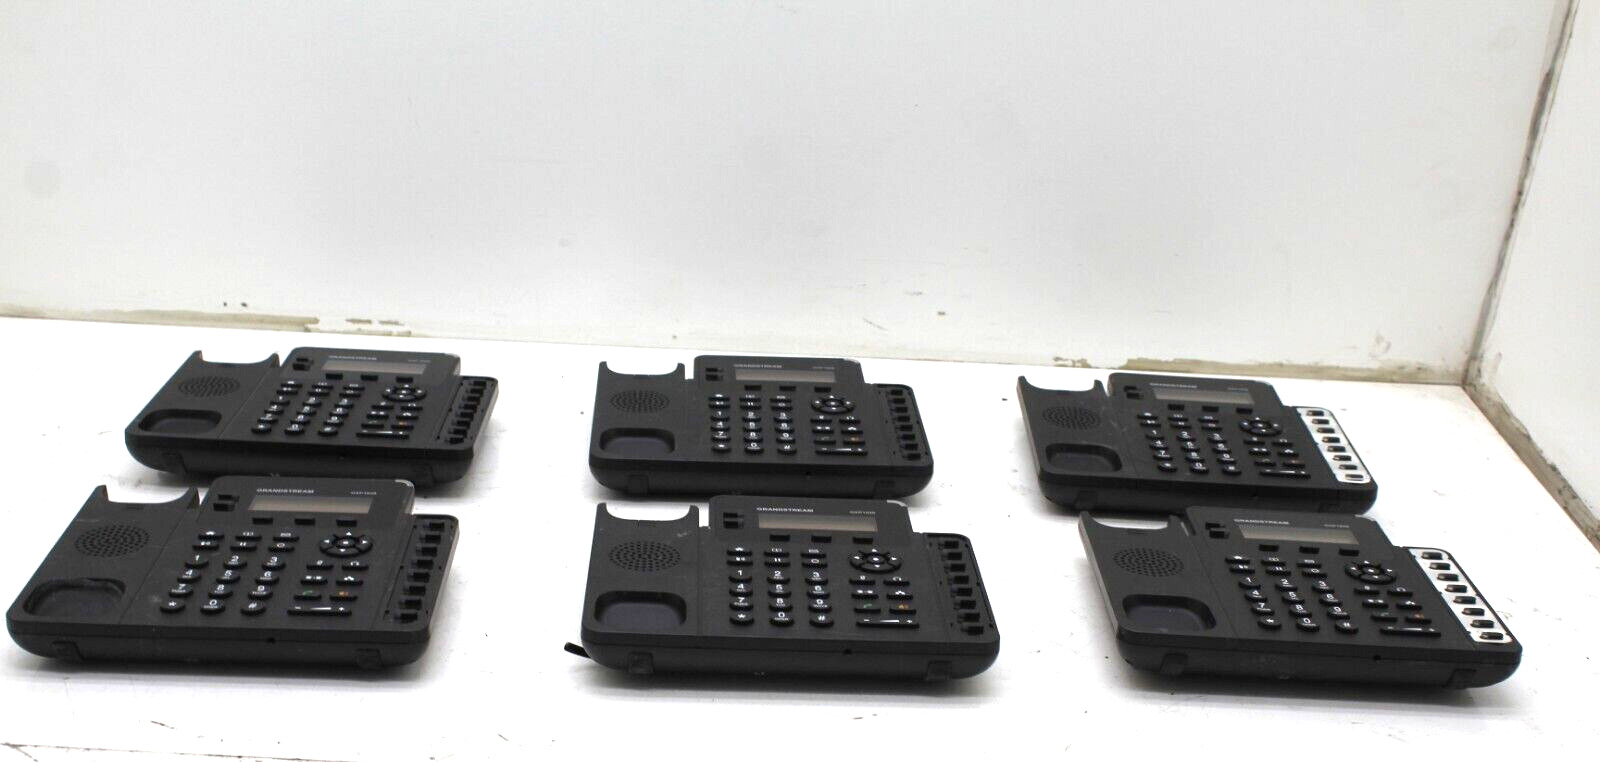 Lot of 19 GRANDSTREAM GXP1628 GIGABIT IP PHONE BASES ONLY - No Handsets or Stand